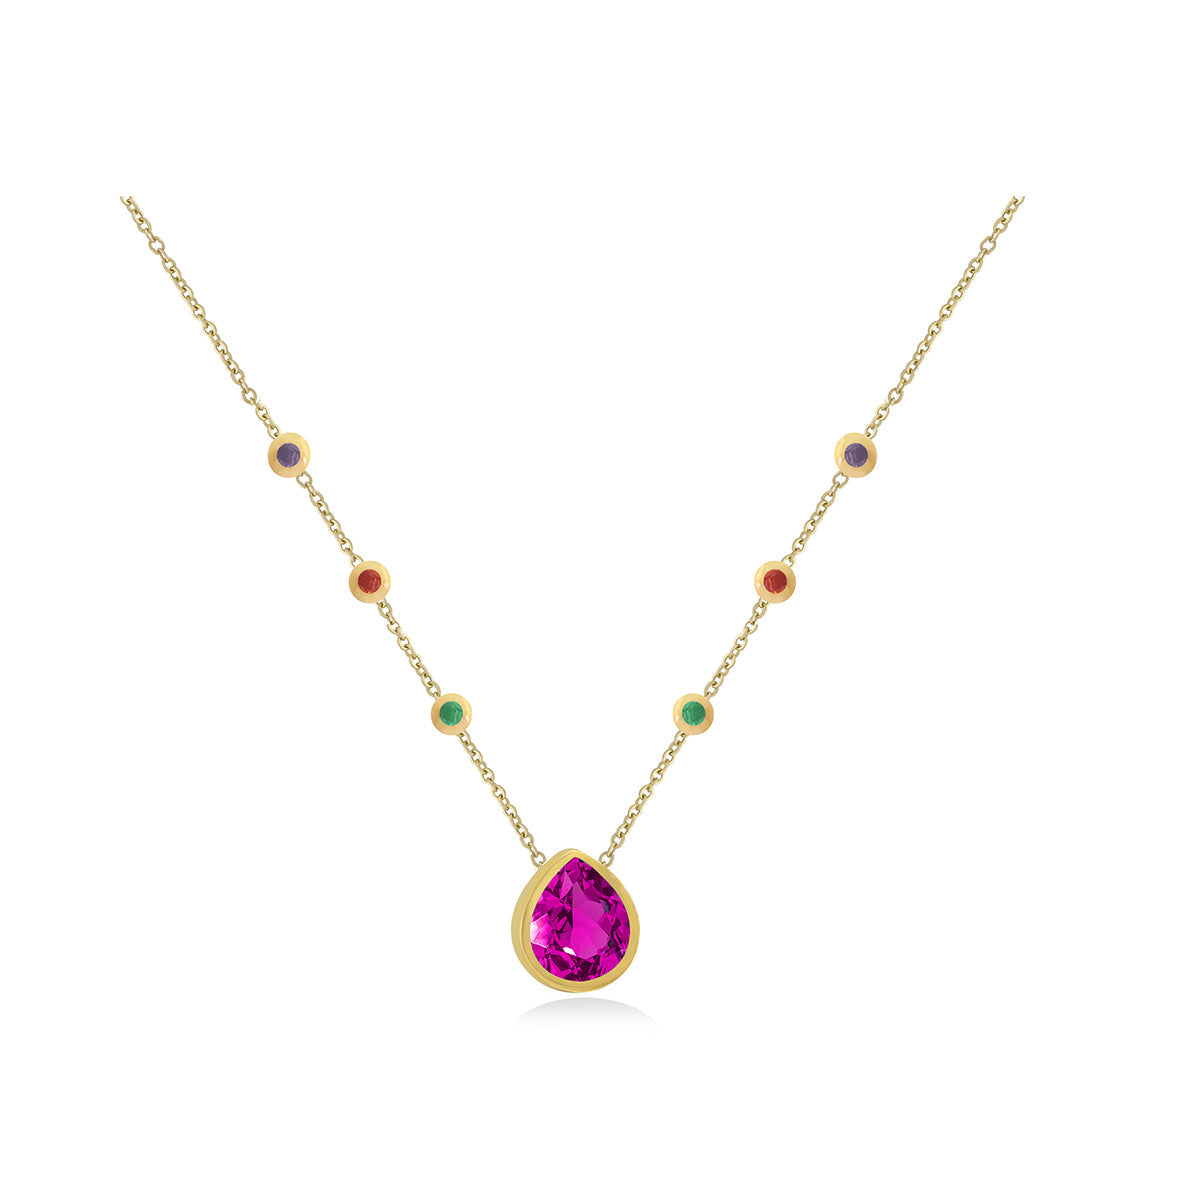 Chain Necklace Inlaid With Colorful Gem Stones In 18K Yellow Gold